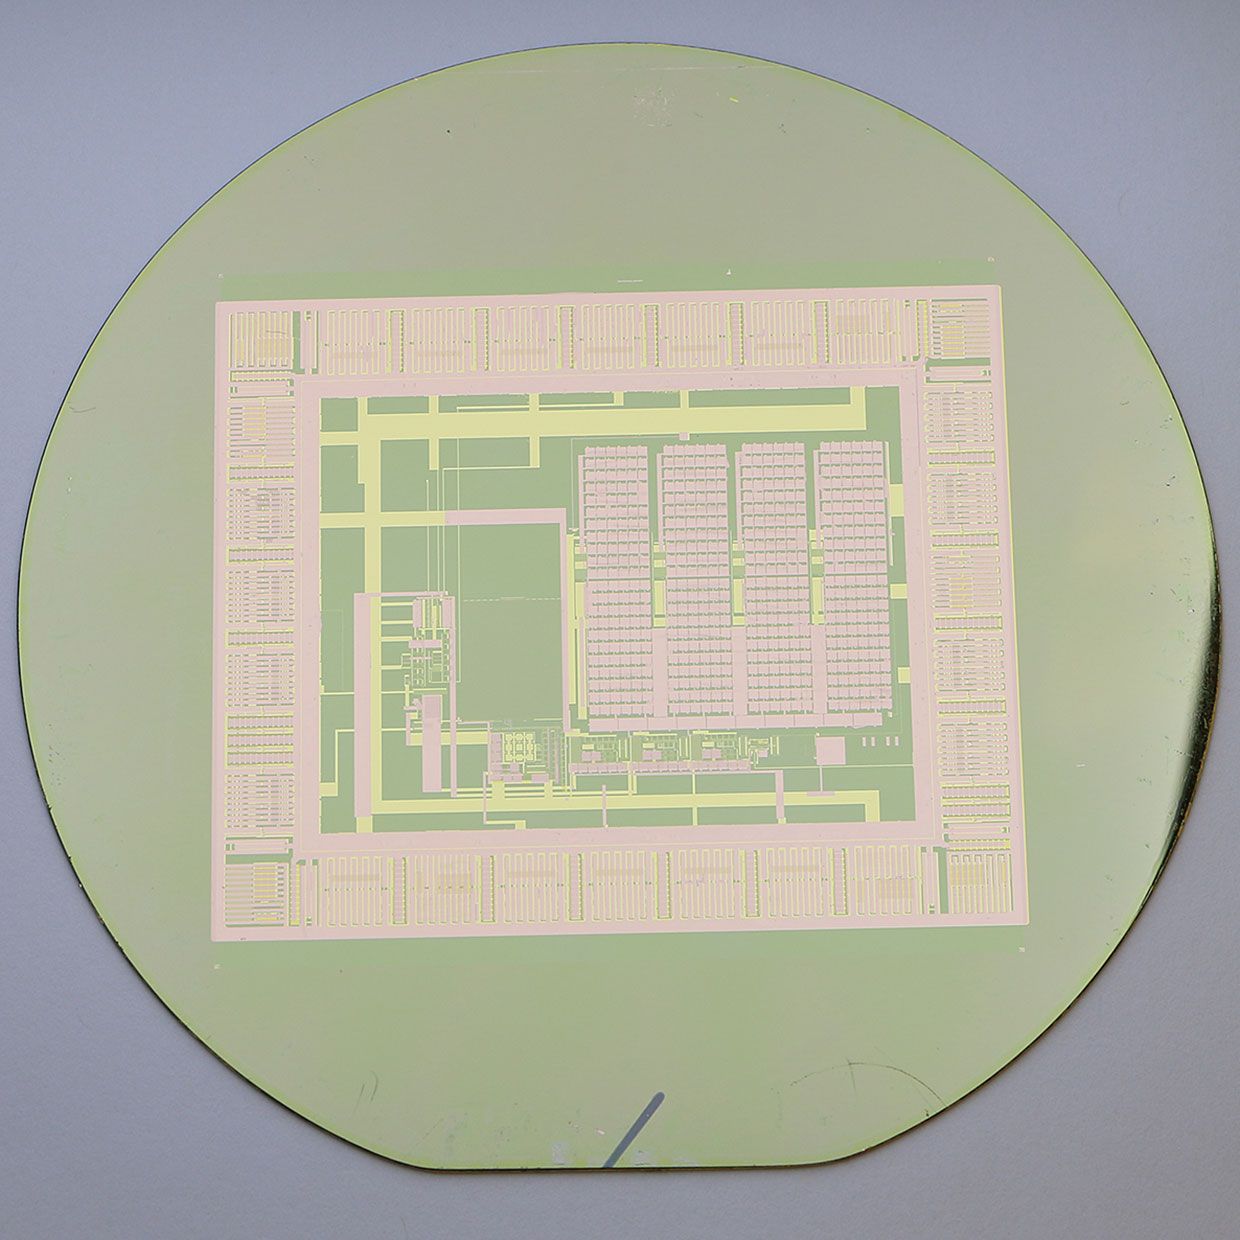 The thin-film electronic circuit can peel easily from its silicon wafer with water, making the wafer reusable for building a nearly infinite number of circuits. 